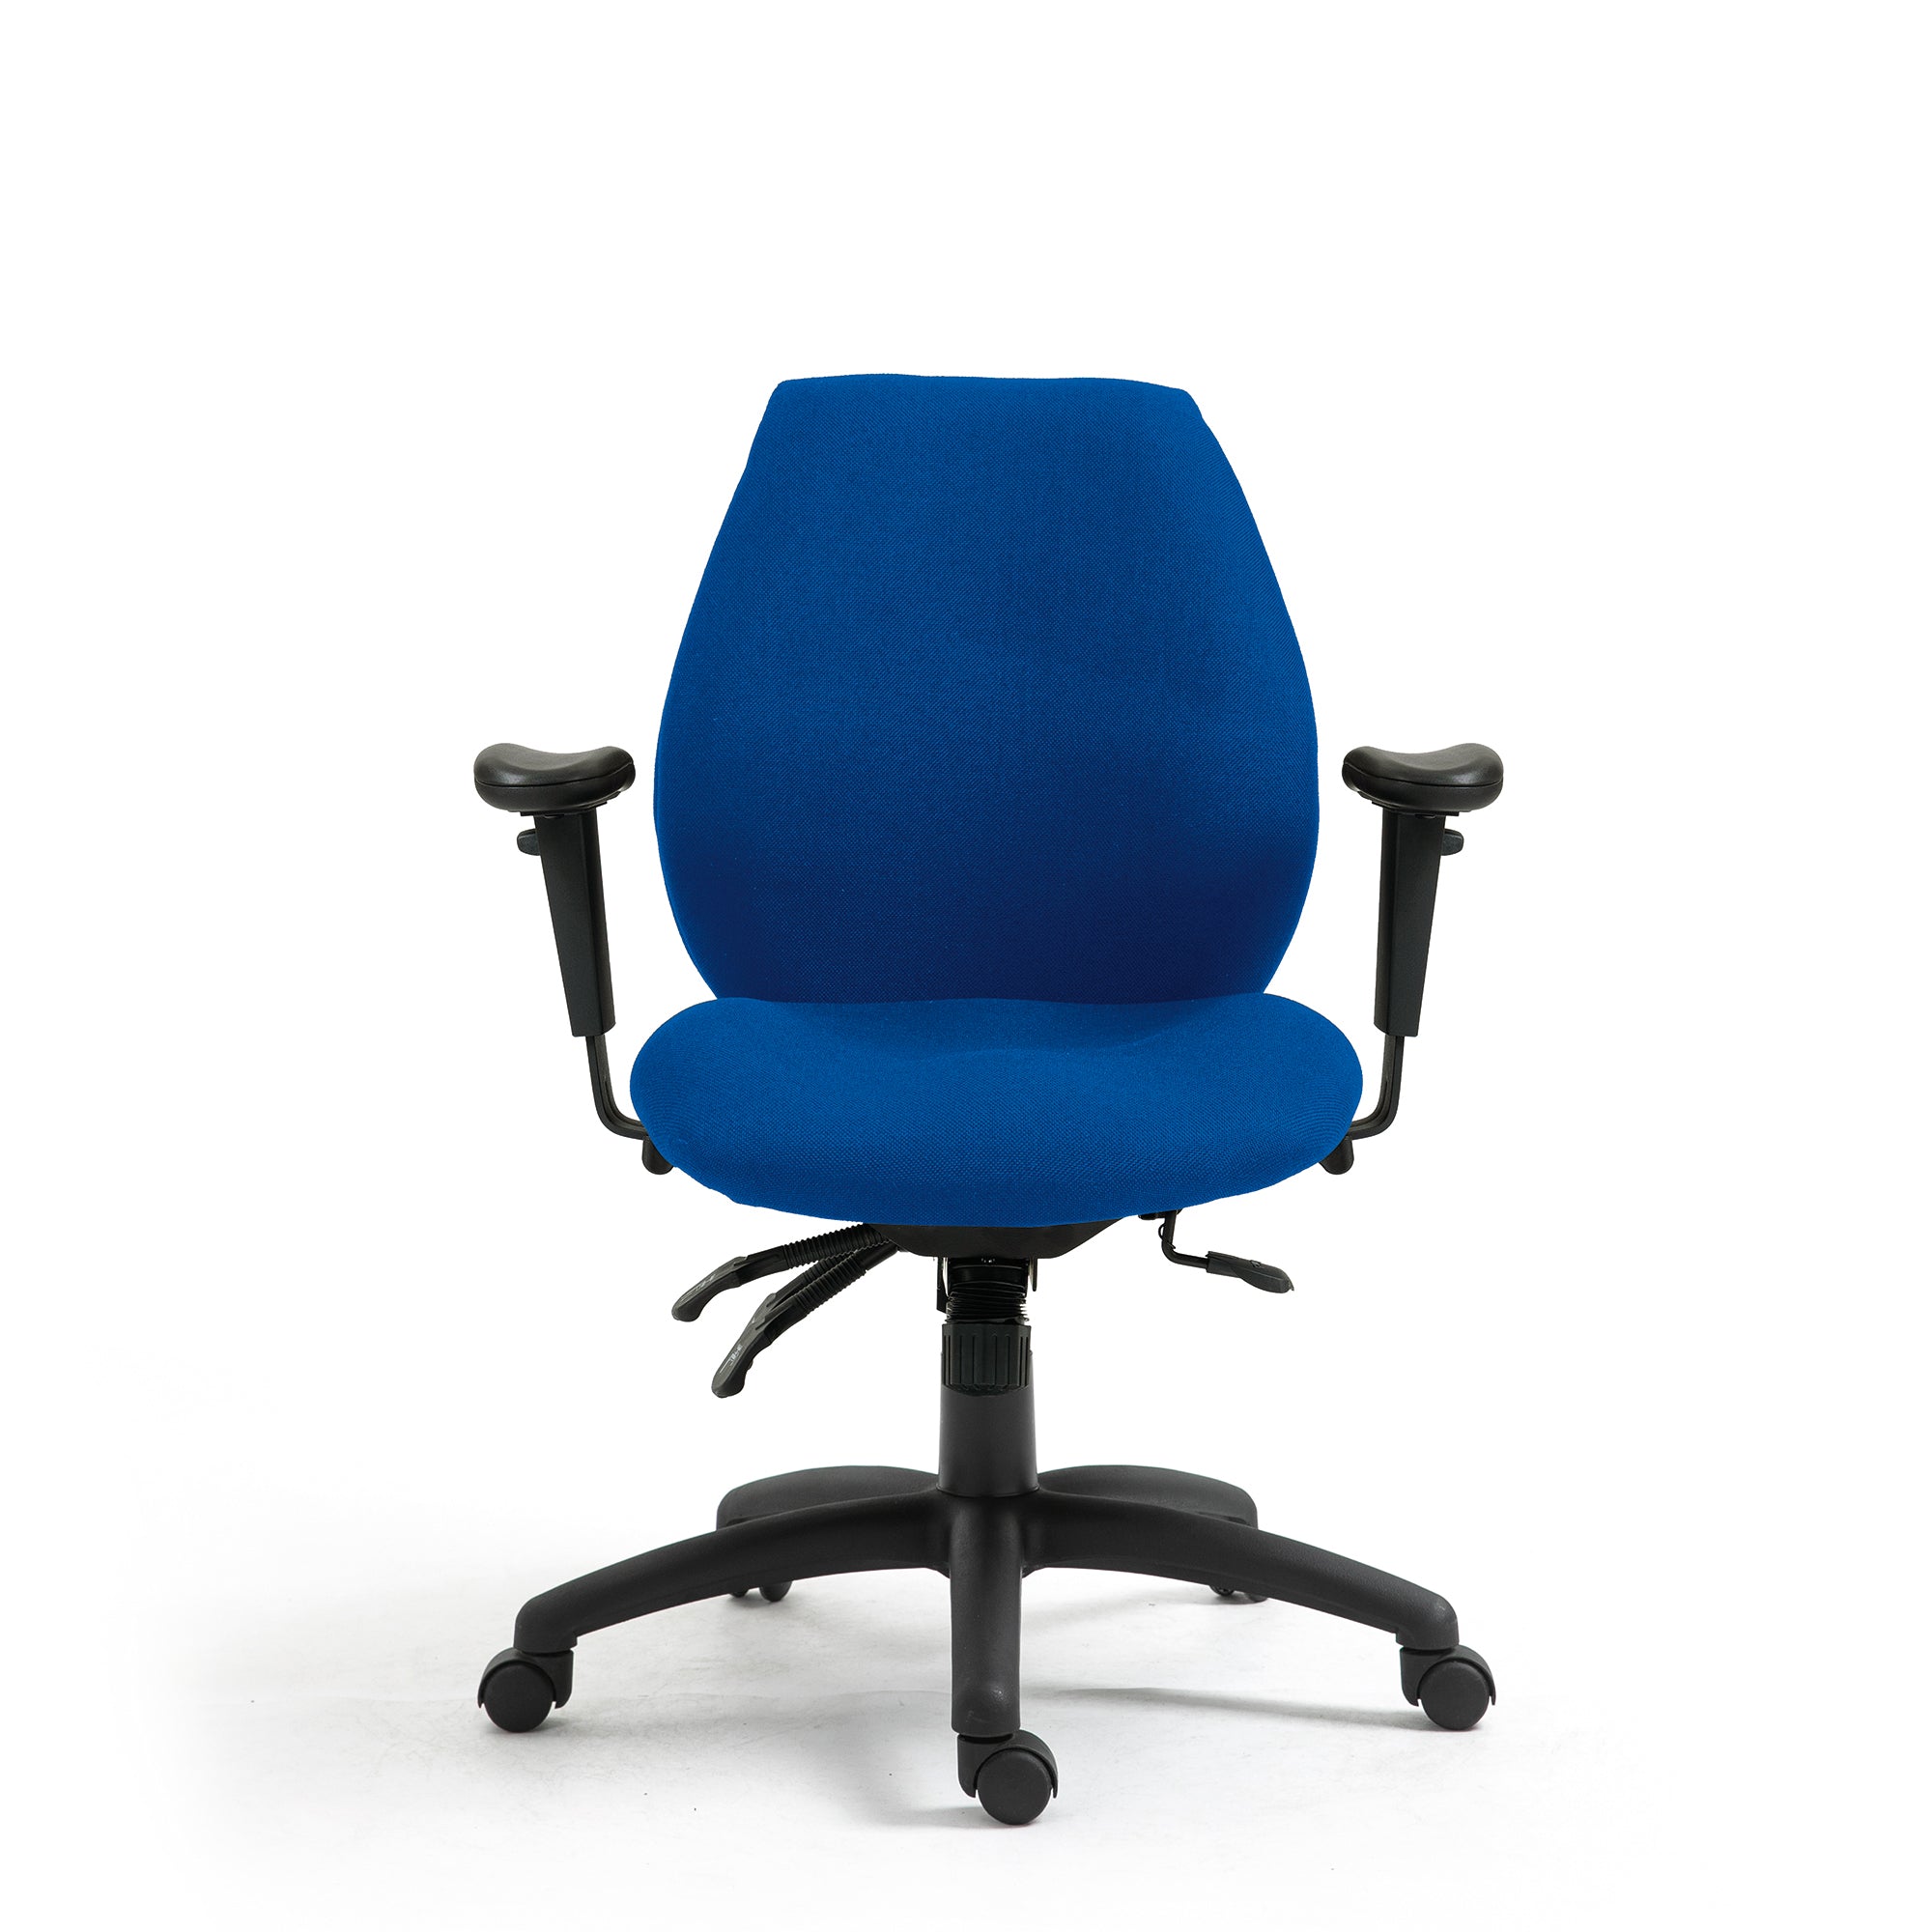 Severn – Ergonomic Medium Back Multi-Functional Synchronous Operator Chair with Adjustable Arms